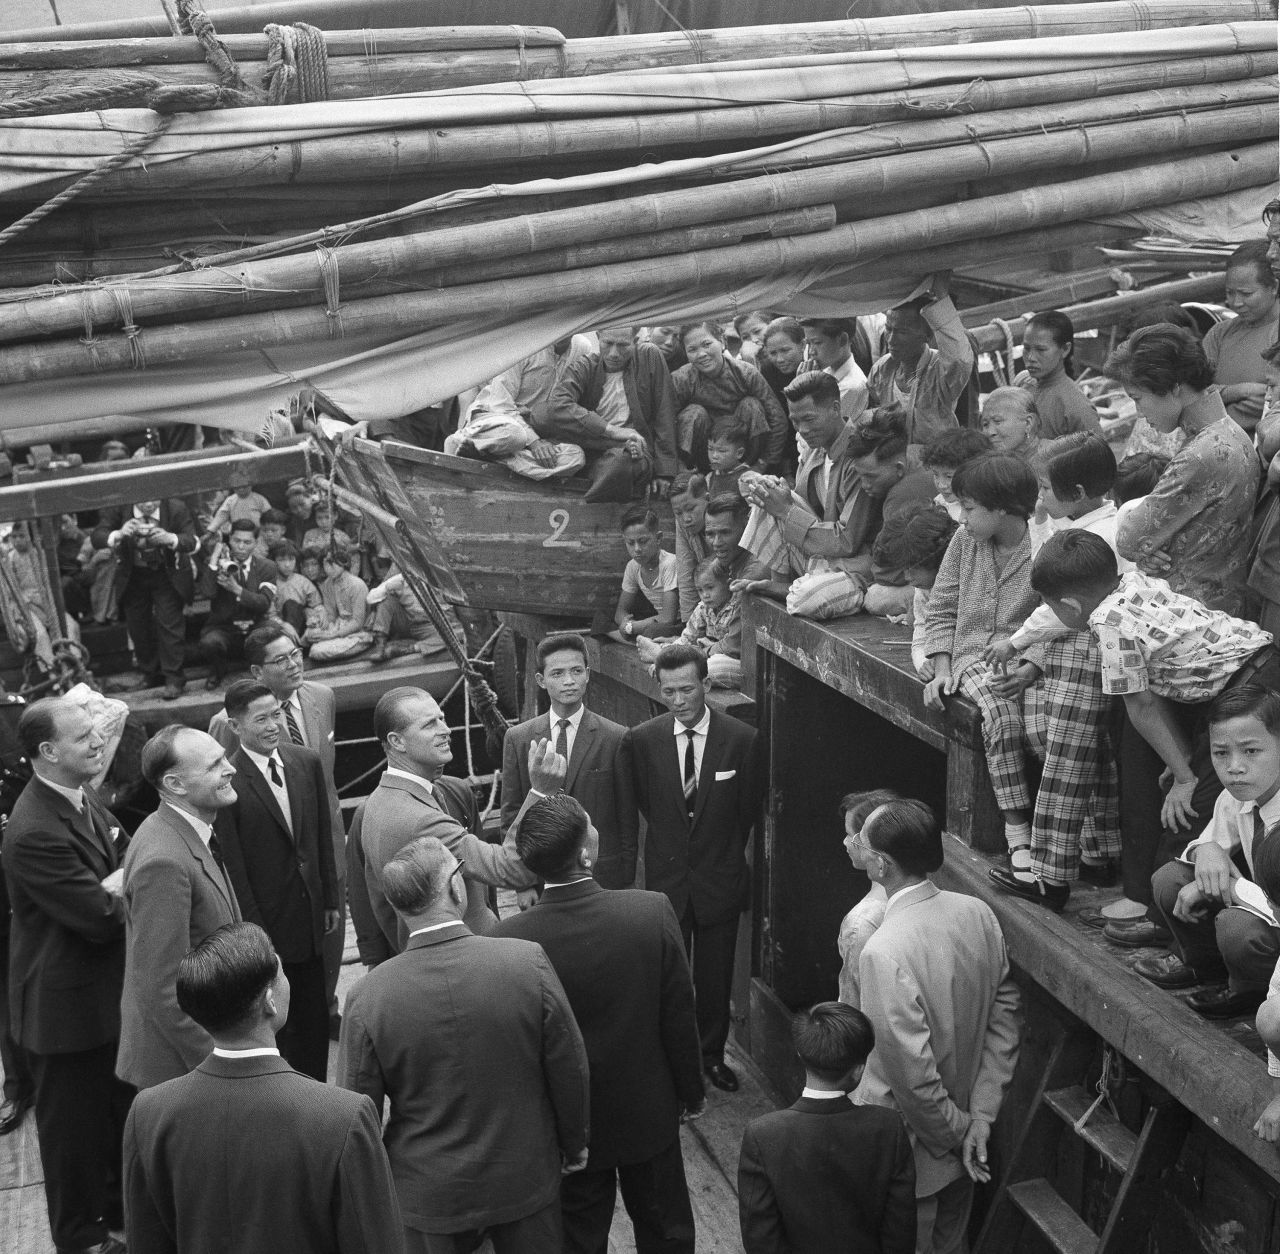 Britain's Prince Philip speaks with locals aboard a fishing vessel at the Aberdeen floating village in Hong Kong in 1959. Hundreds of fishermen crowded the decks of the junks to catch a glimpse of the prince as he made his tour. 